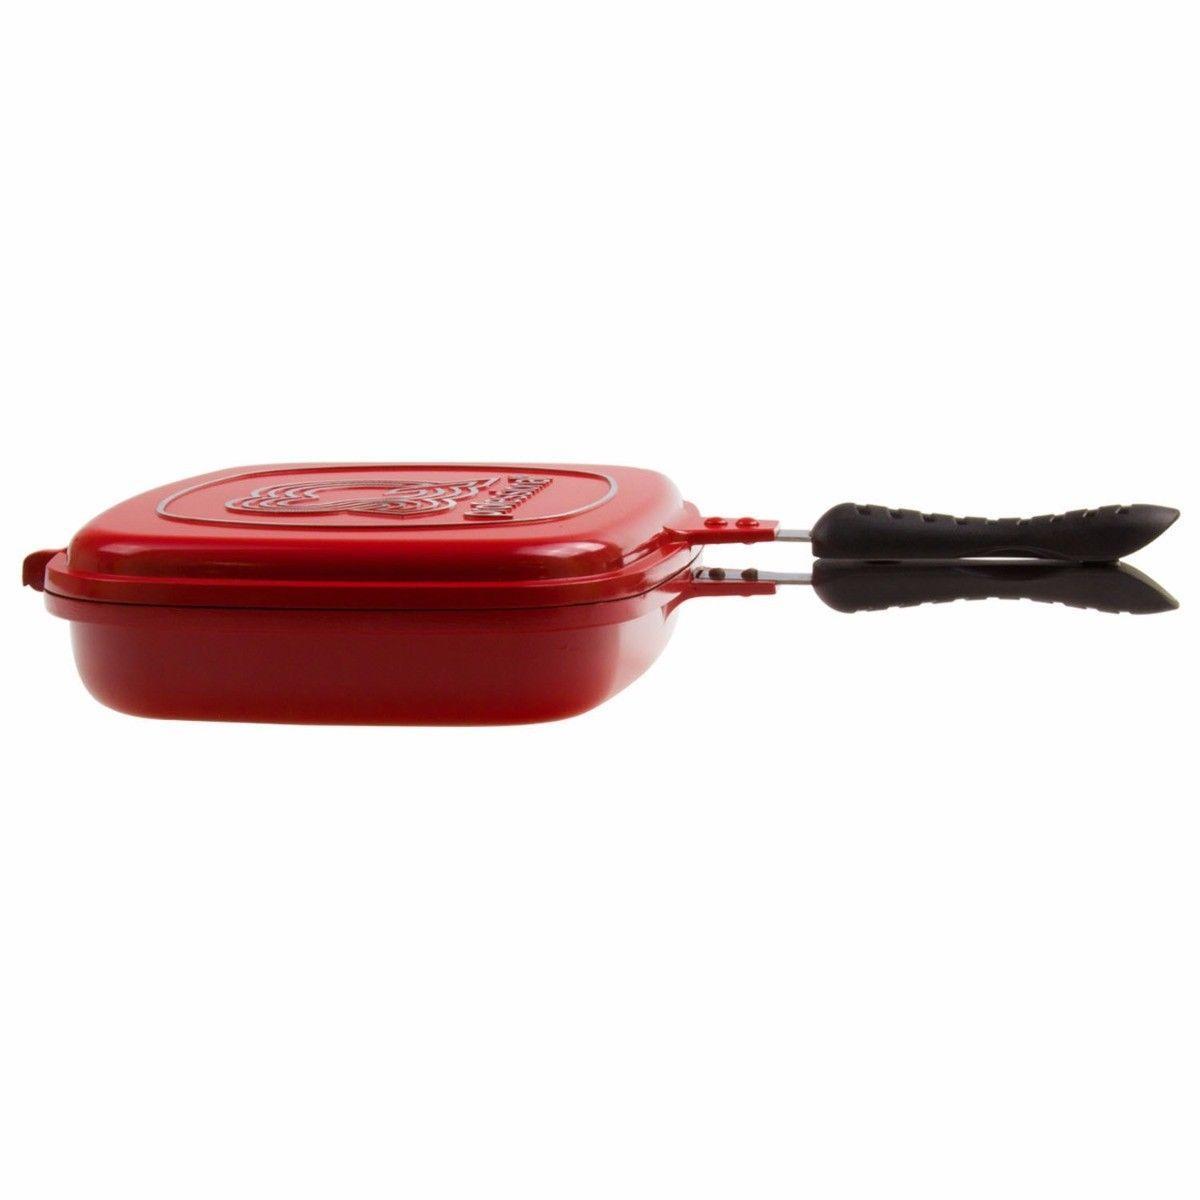 SQ Professional Nea Rossa Die Cast Magic Pan 32cm Double Sided Red 4680 (Parcel Rate)